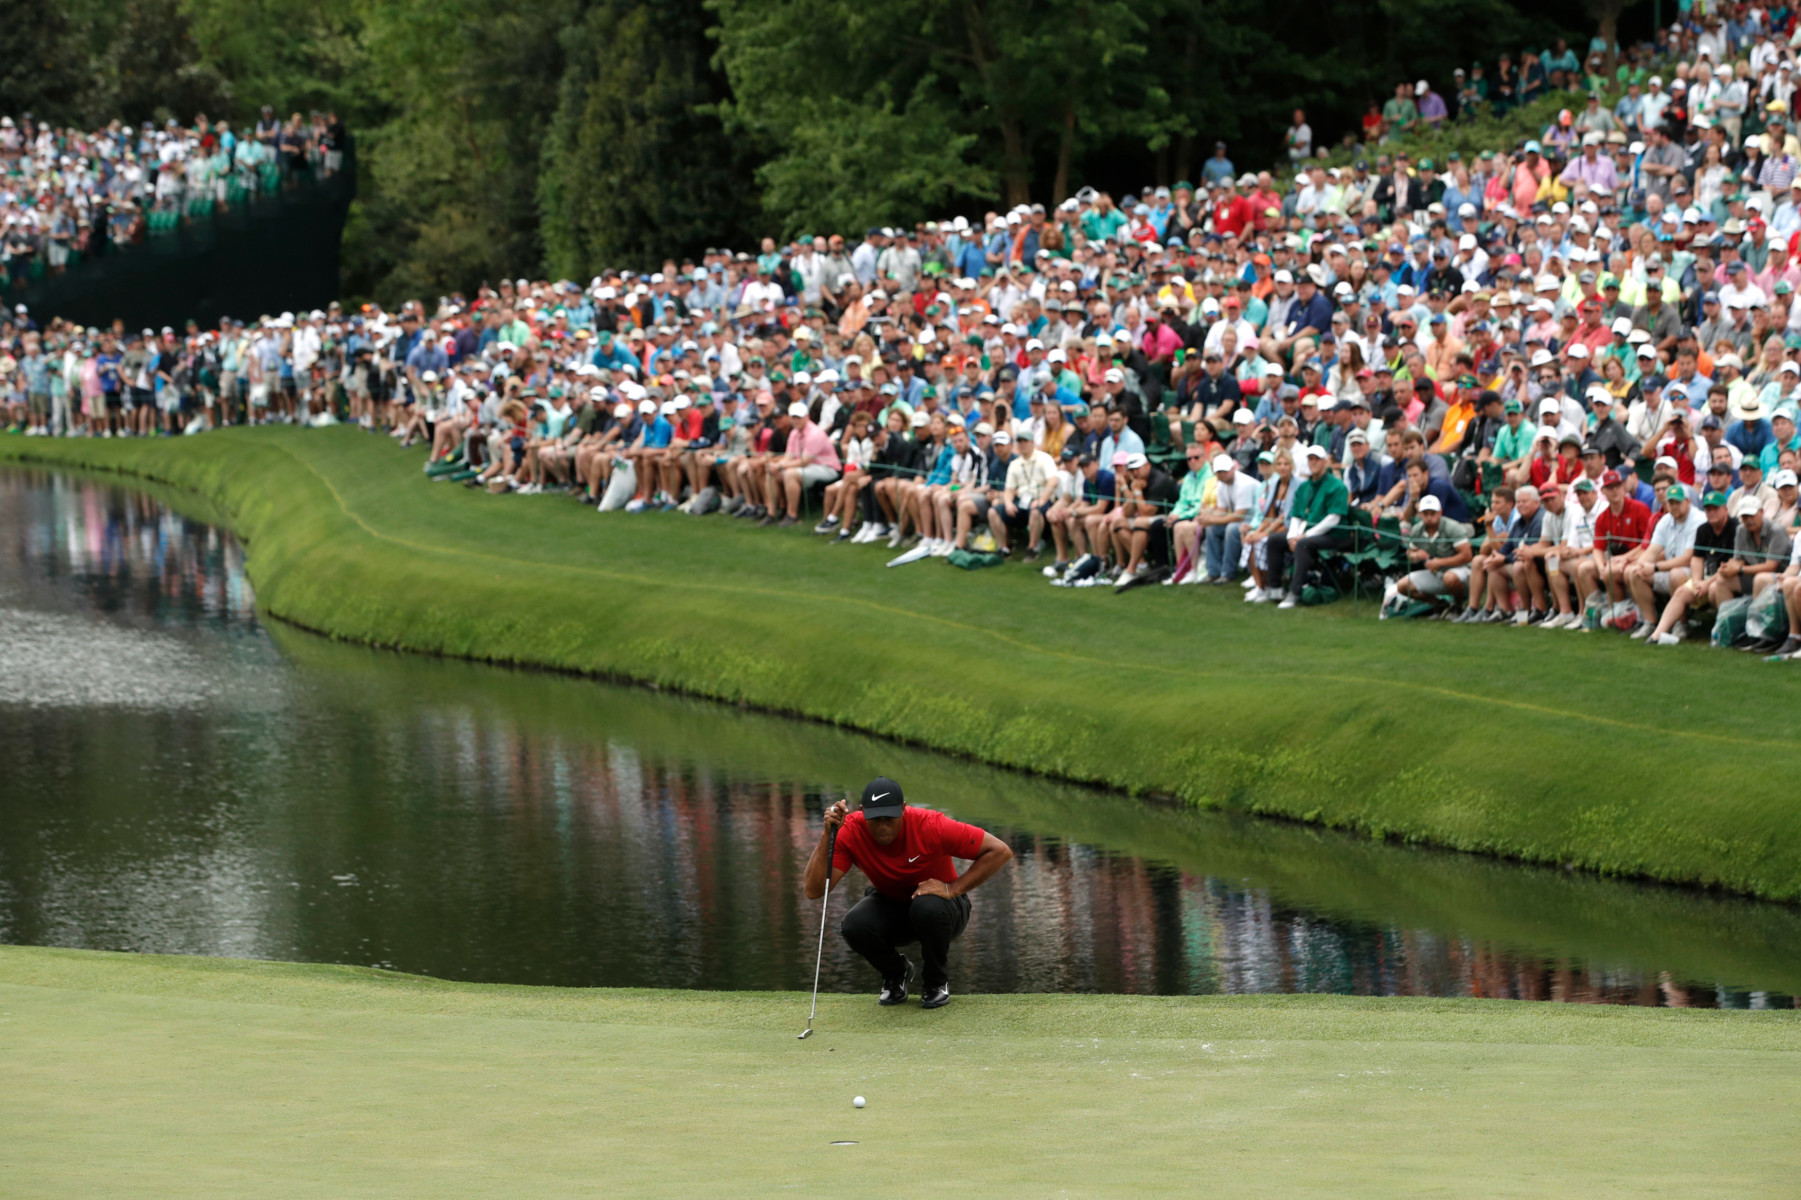 , Masters 2020 golf tournament postponed due to coronavirus crisis as sporting schedule is decimated